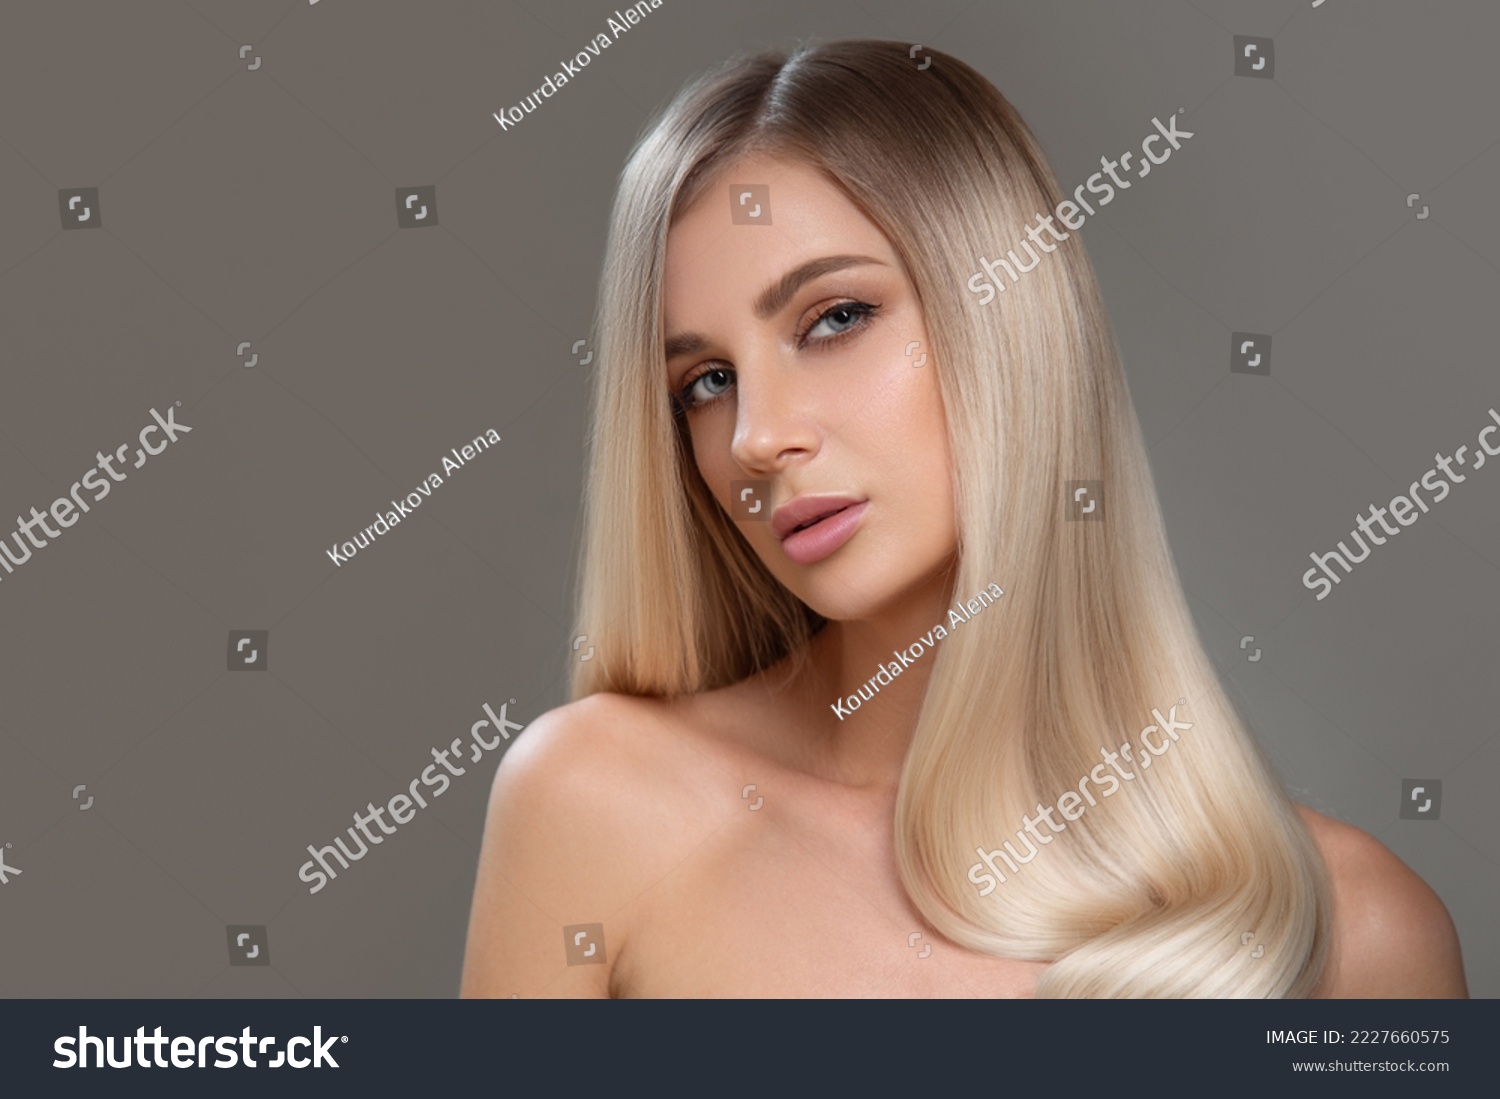 Beautiful young blonde with straight shiny hair. Portrait on a gray background. Hair and makeup #2227660575